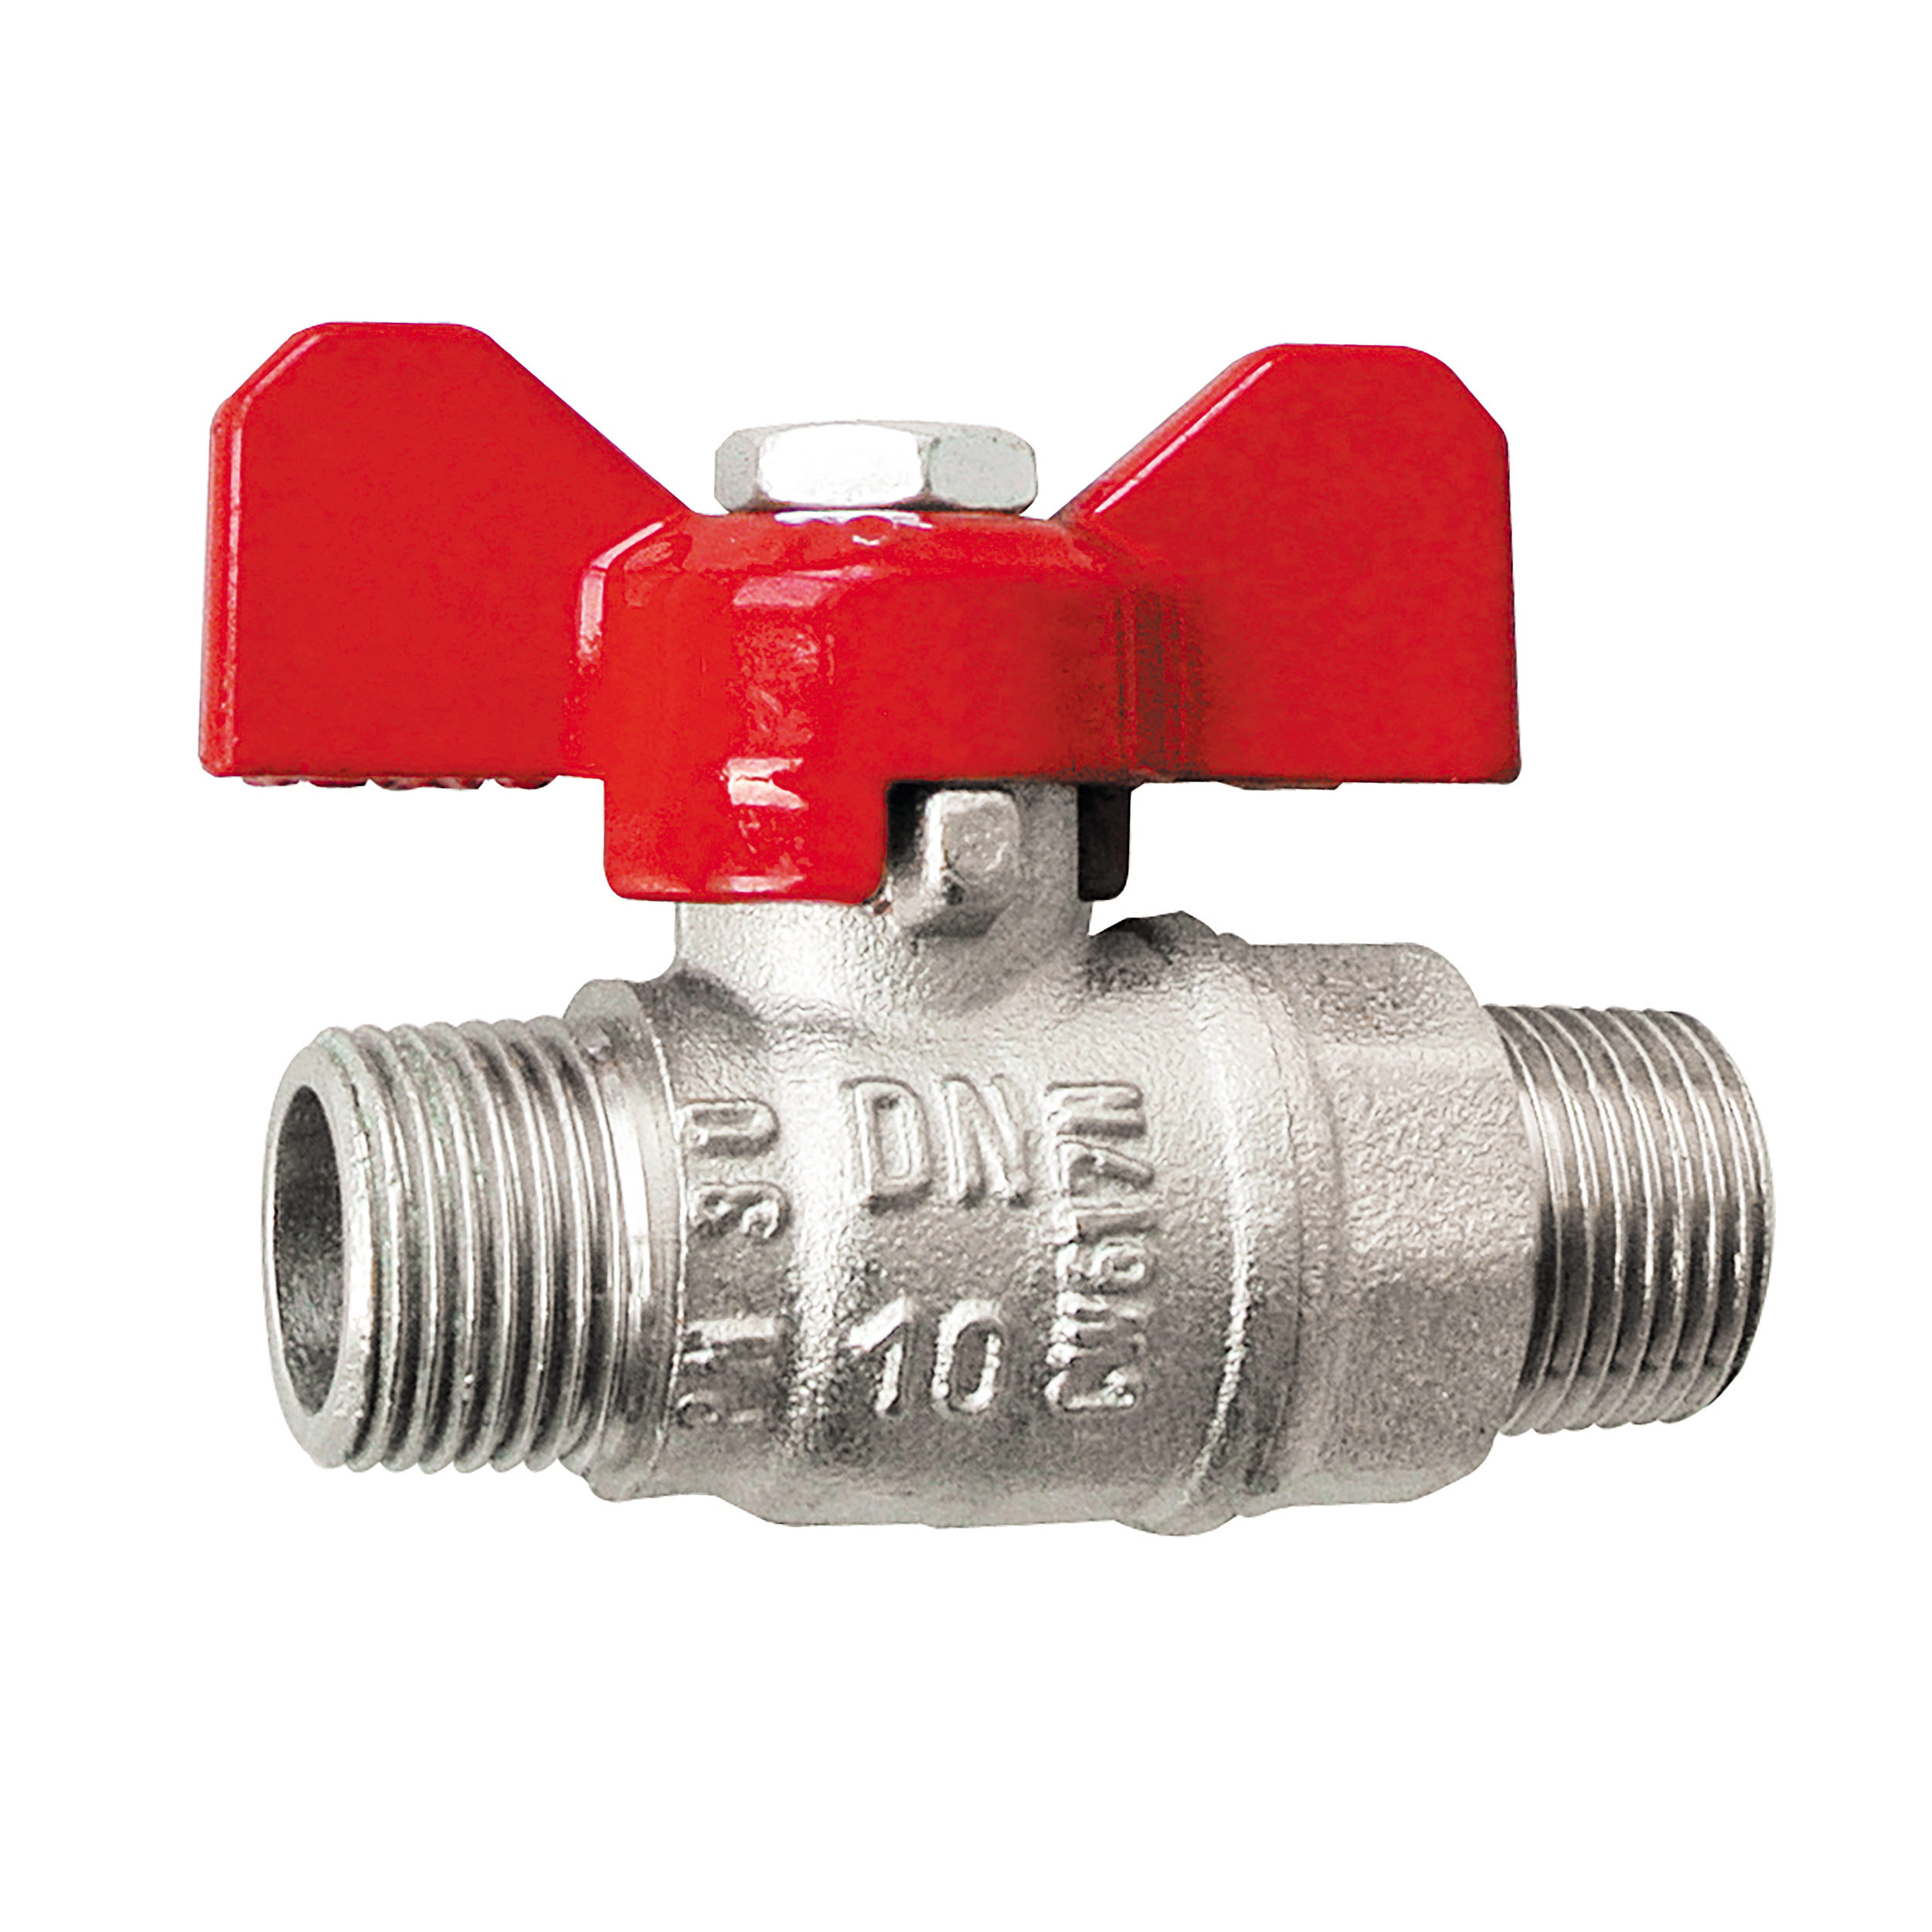 Mini ball valve, metal toggle, max. operating pressure: 435 psi, length: 56 mm, DN 10, connection thread: G⅜ male–male